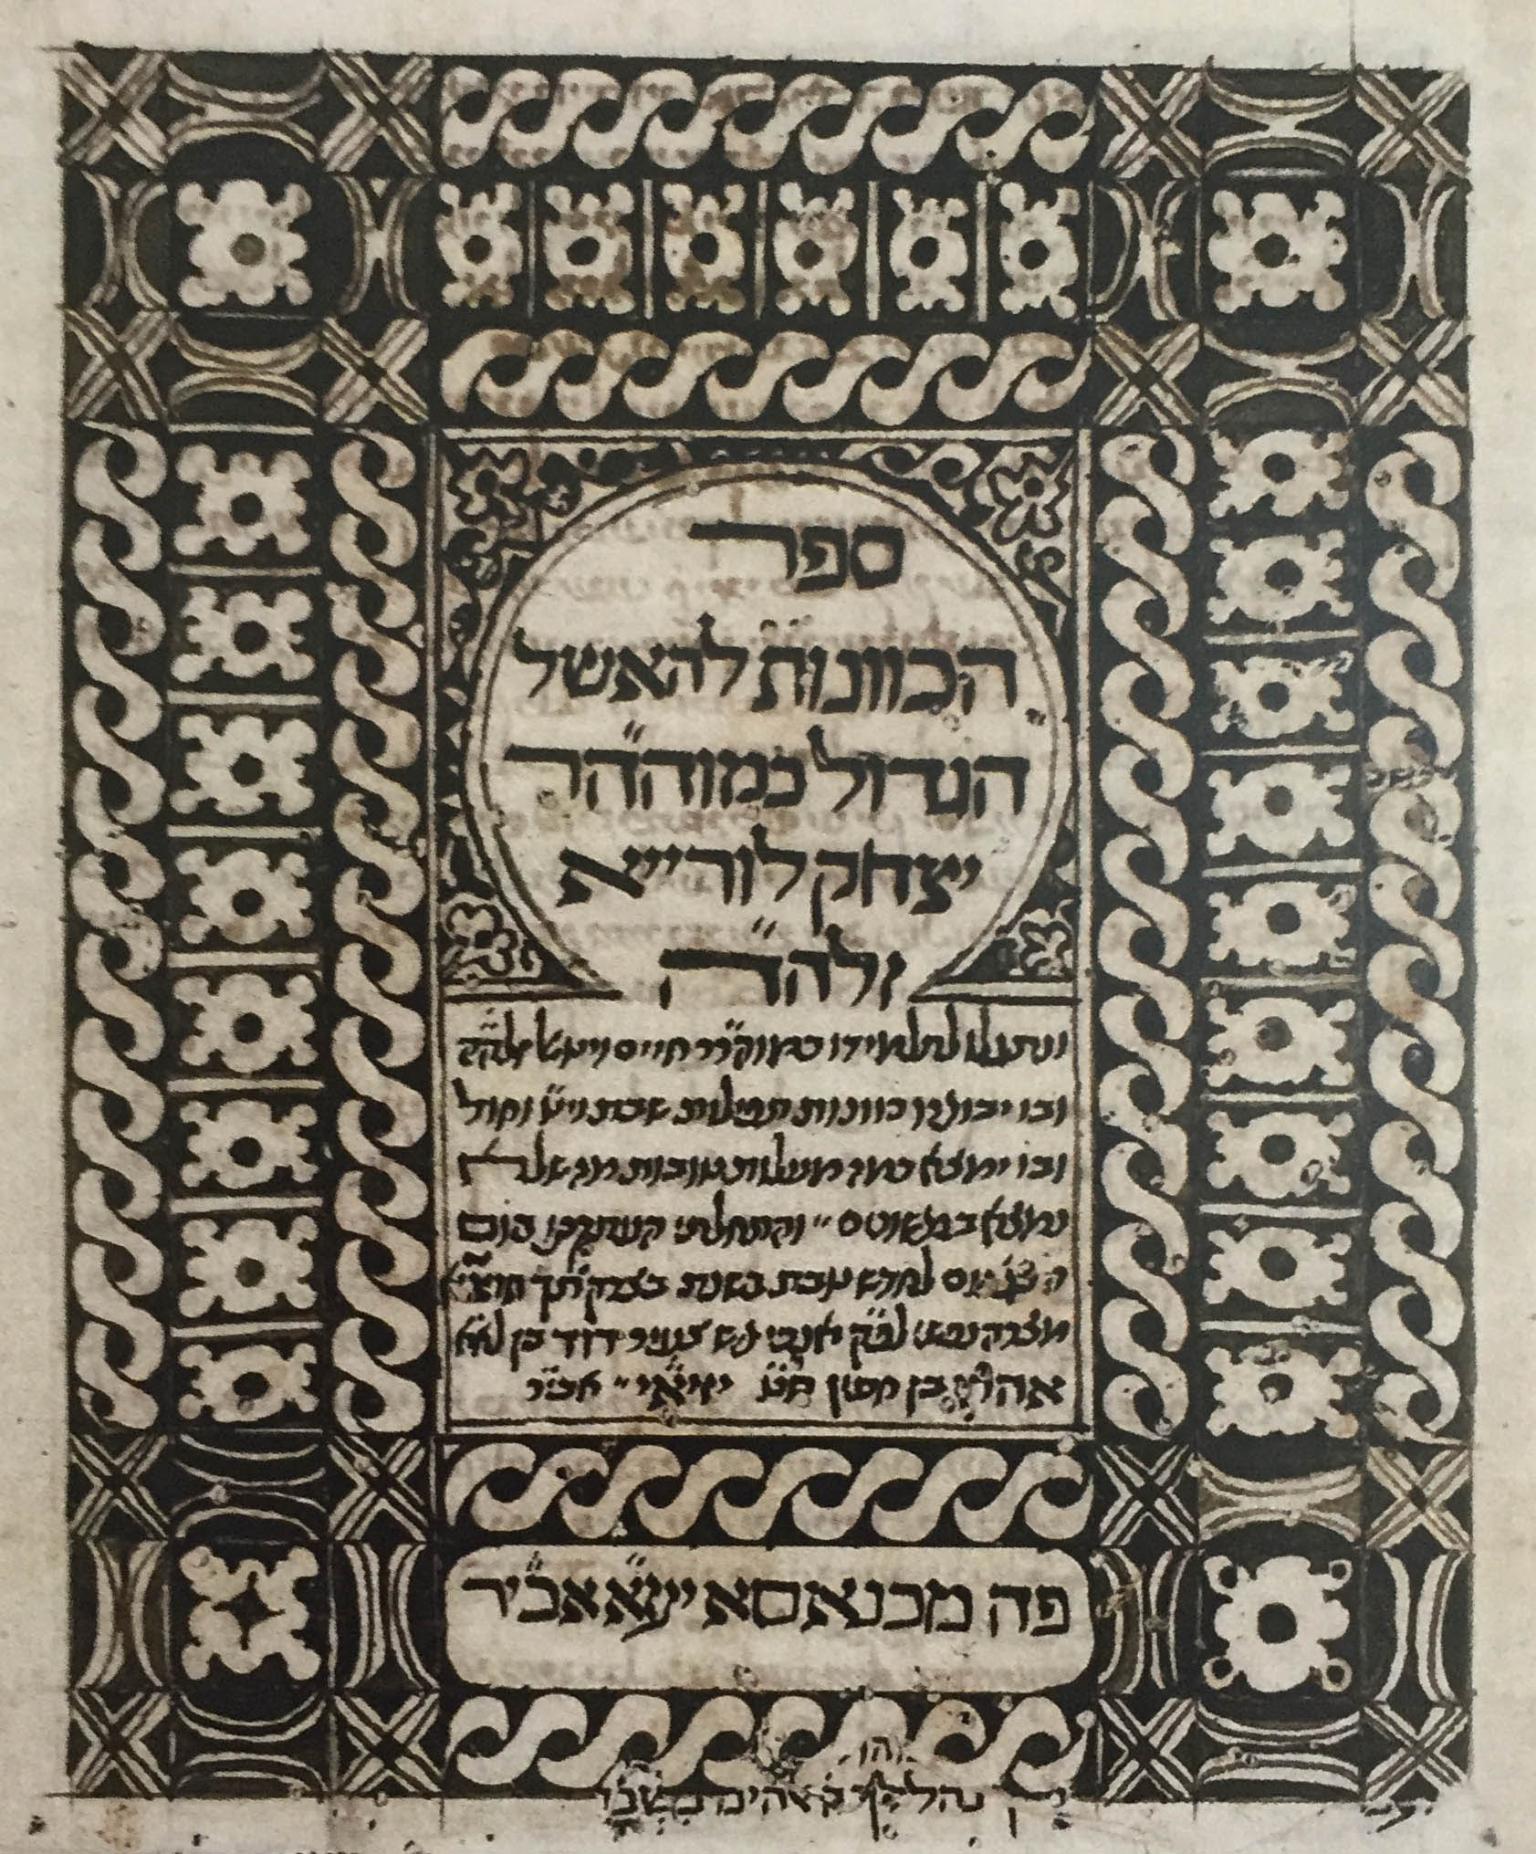 Manuscript page with Hebrew text in middle surrounded by border of geometric shapes.